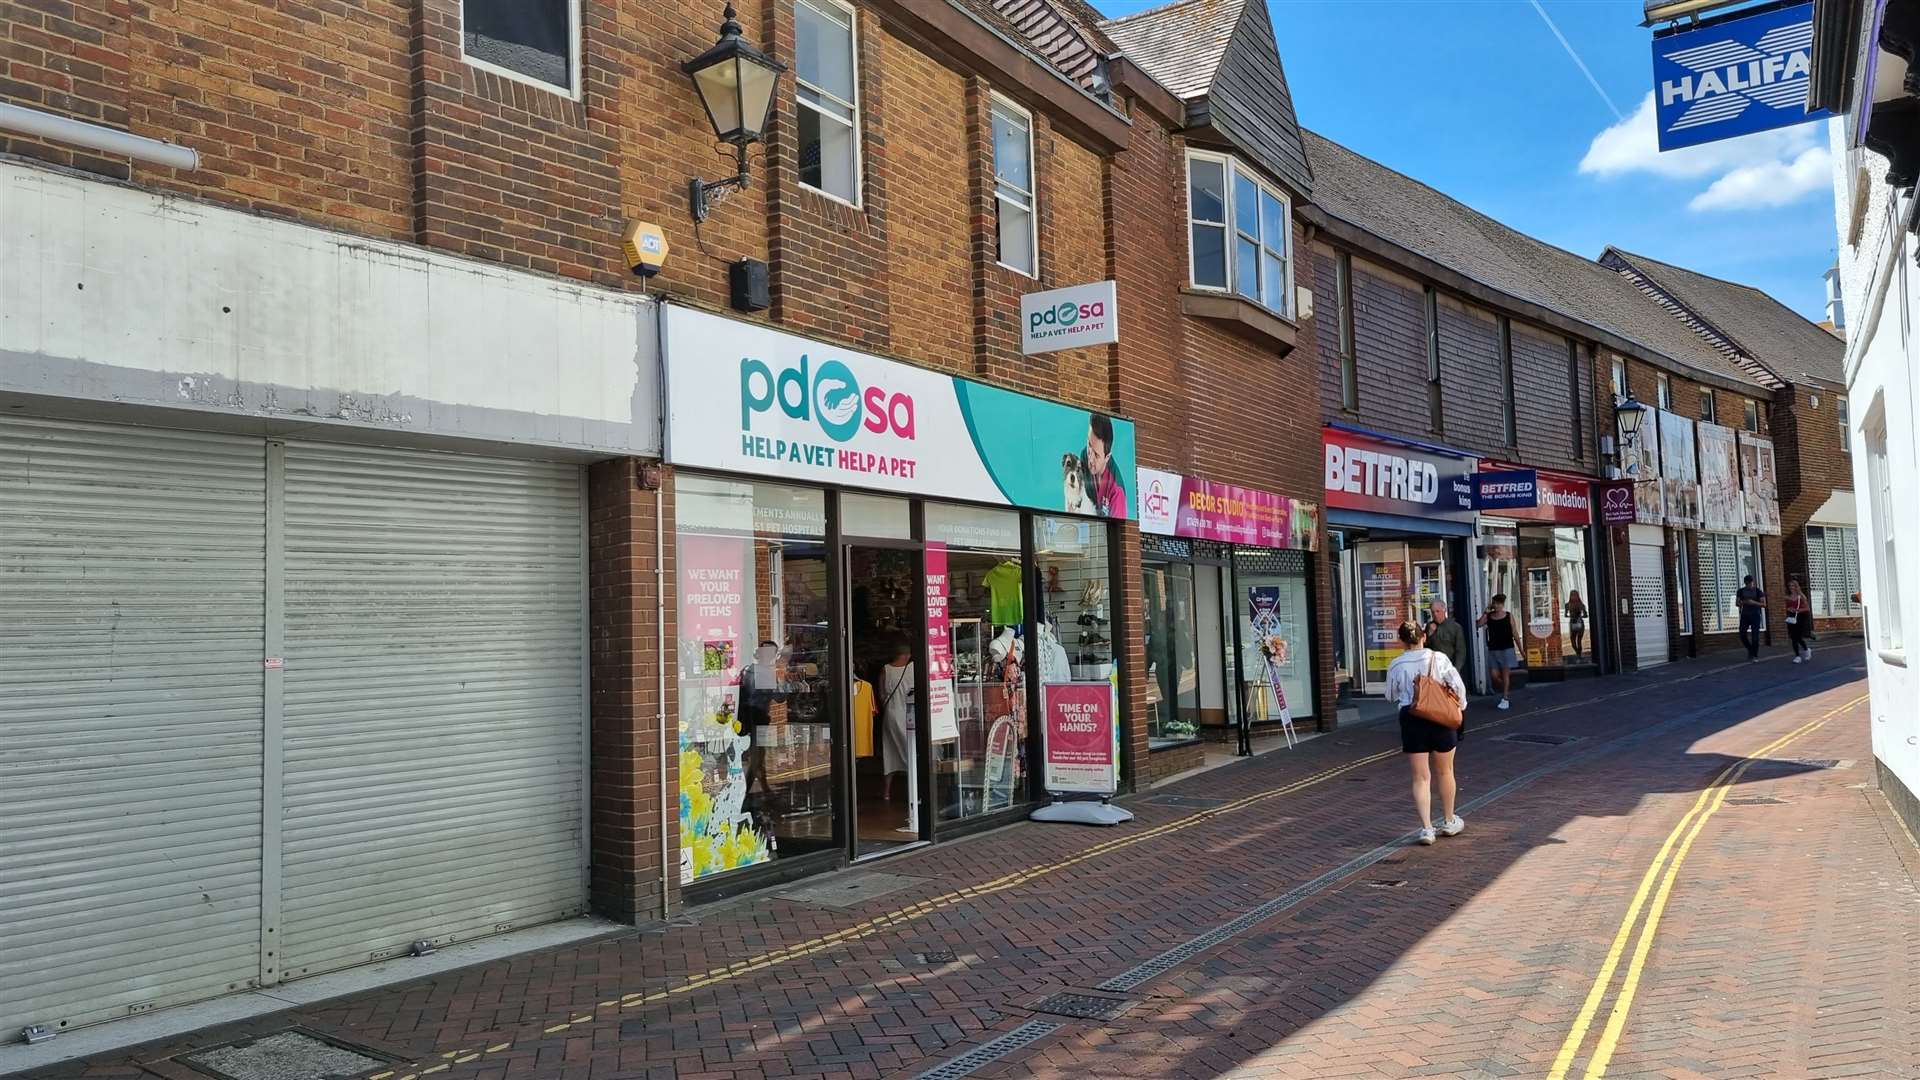 Six shops in New Rents will be knocked down to make way for the scheme